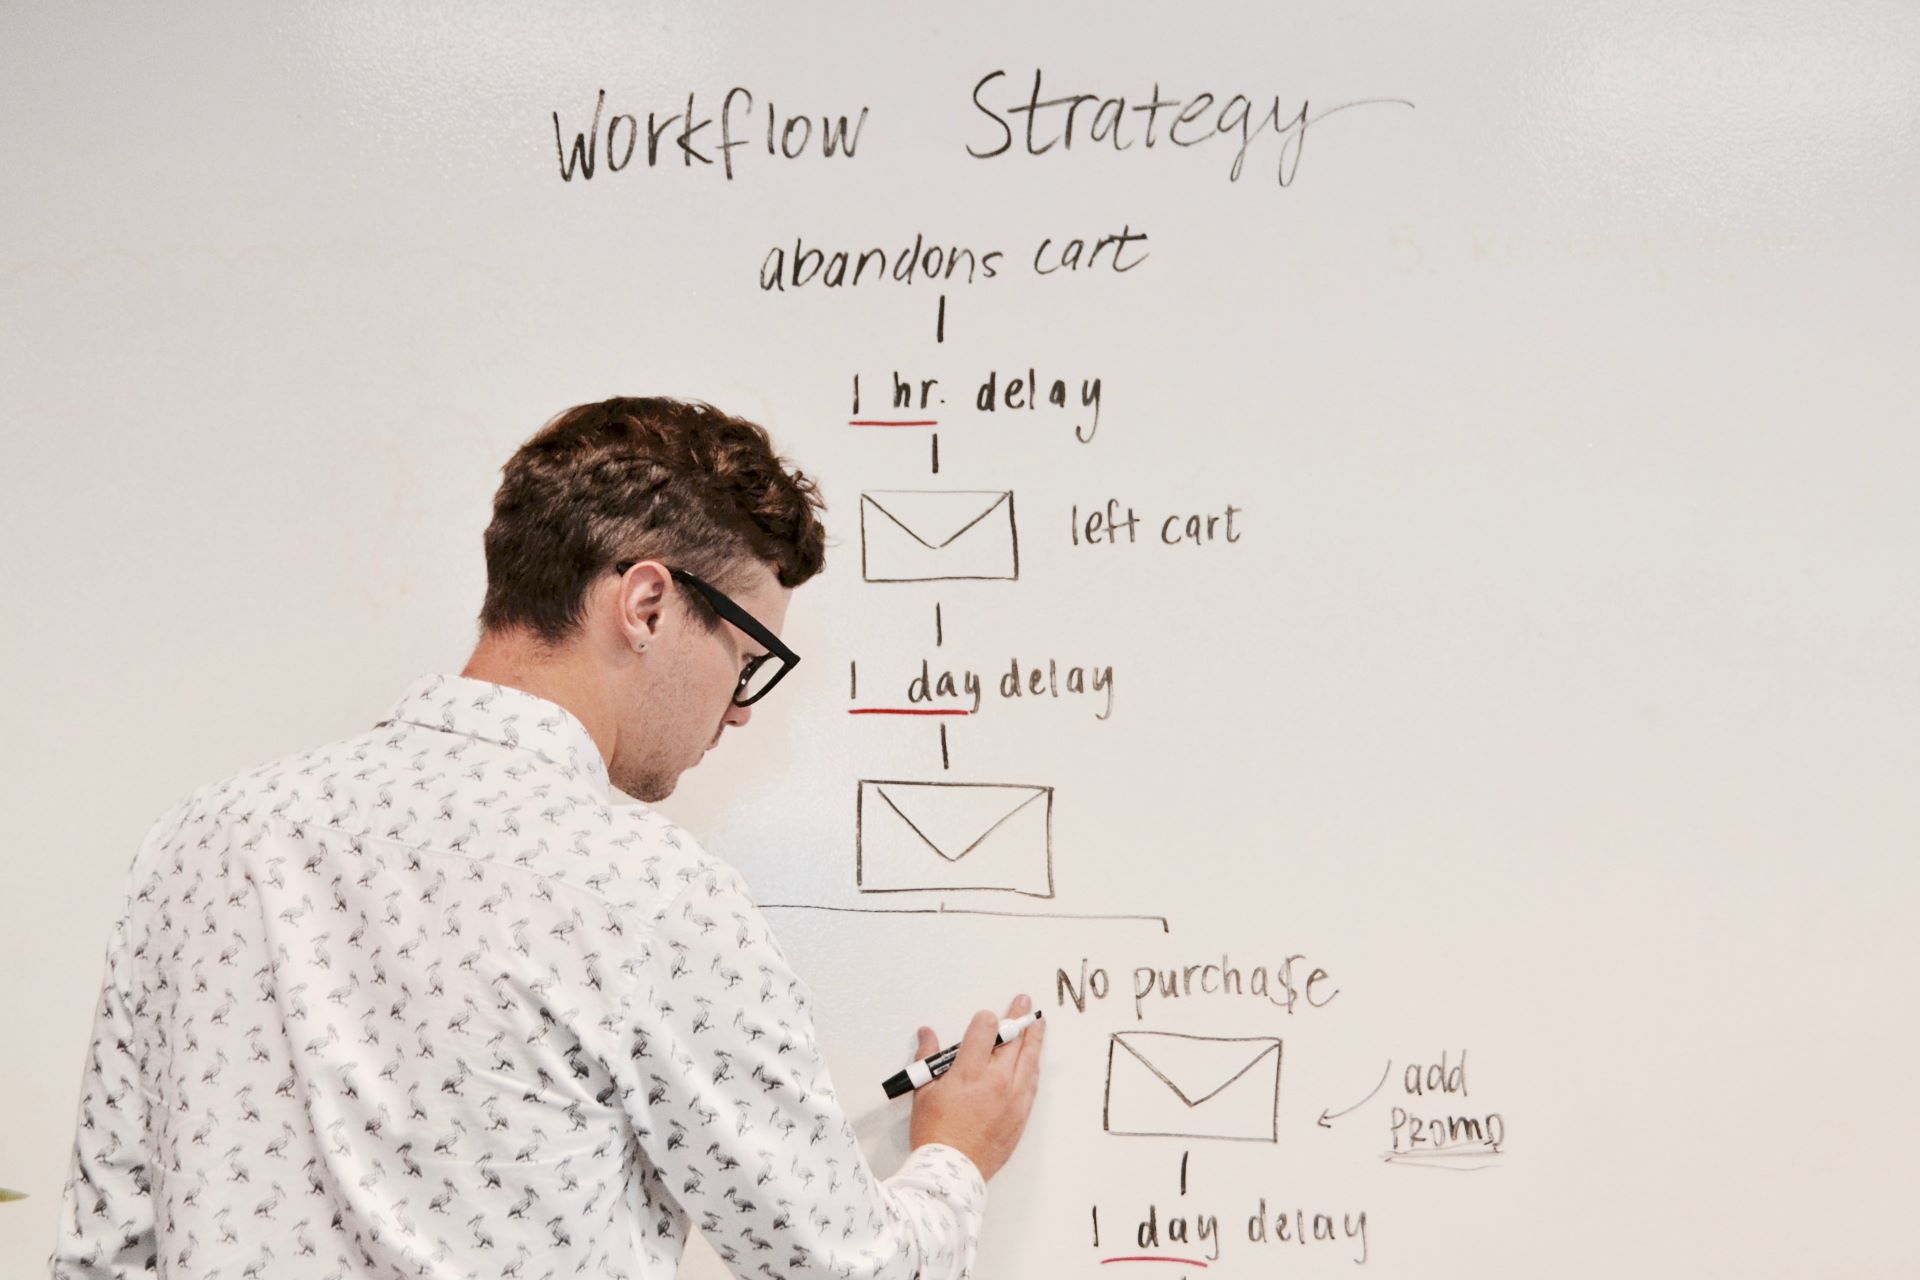 A person creating a workflow strategy